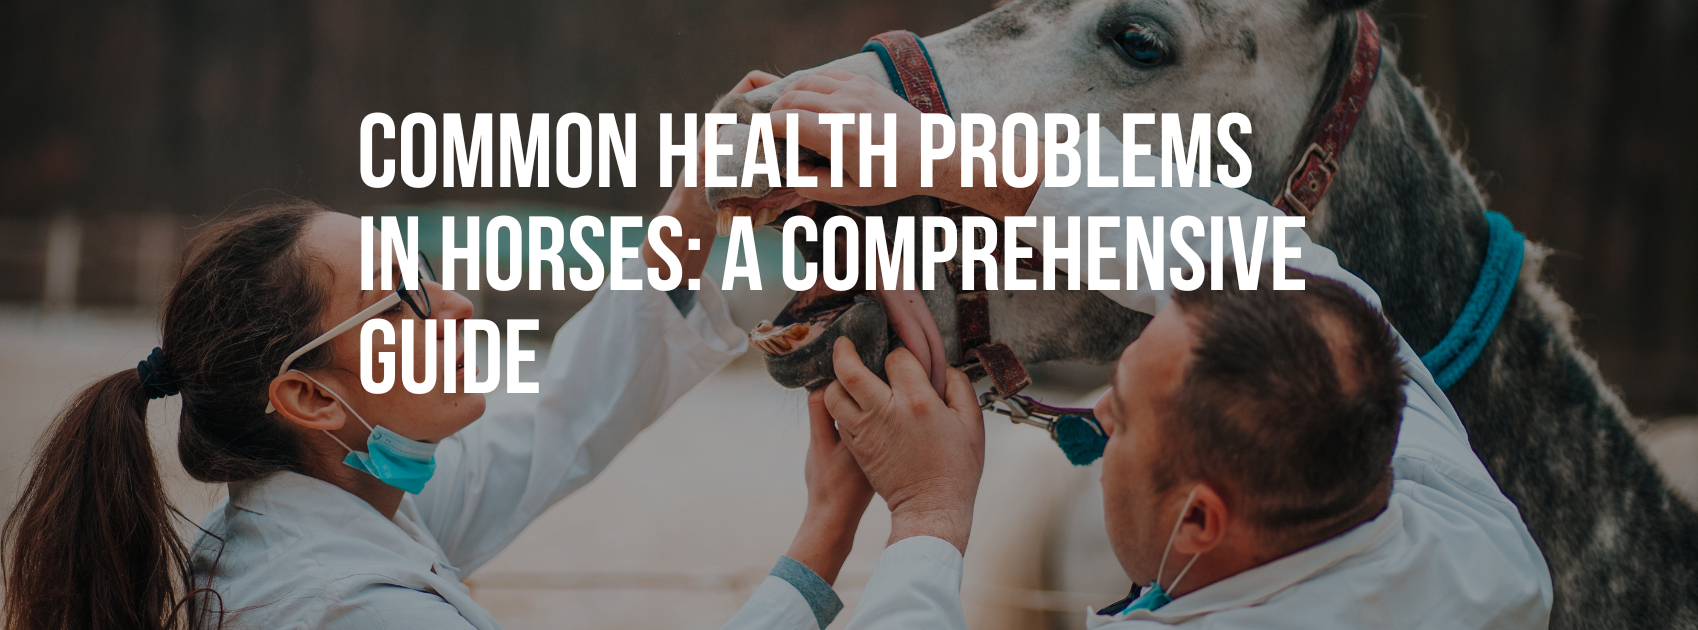 Common Health Problems in Horses: A Comprehensive Guide